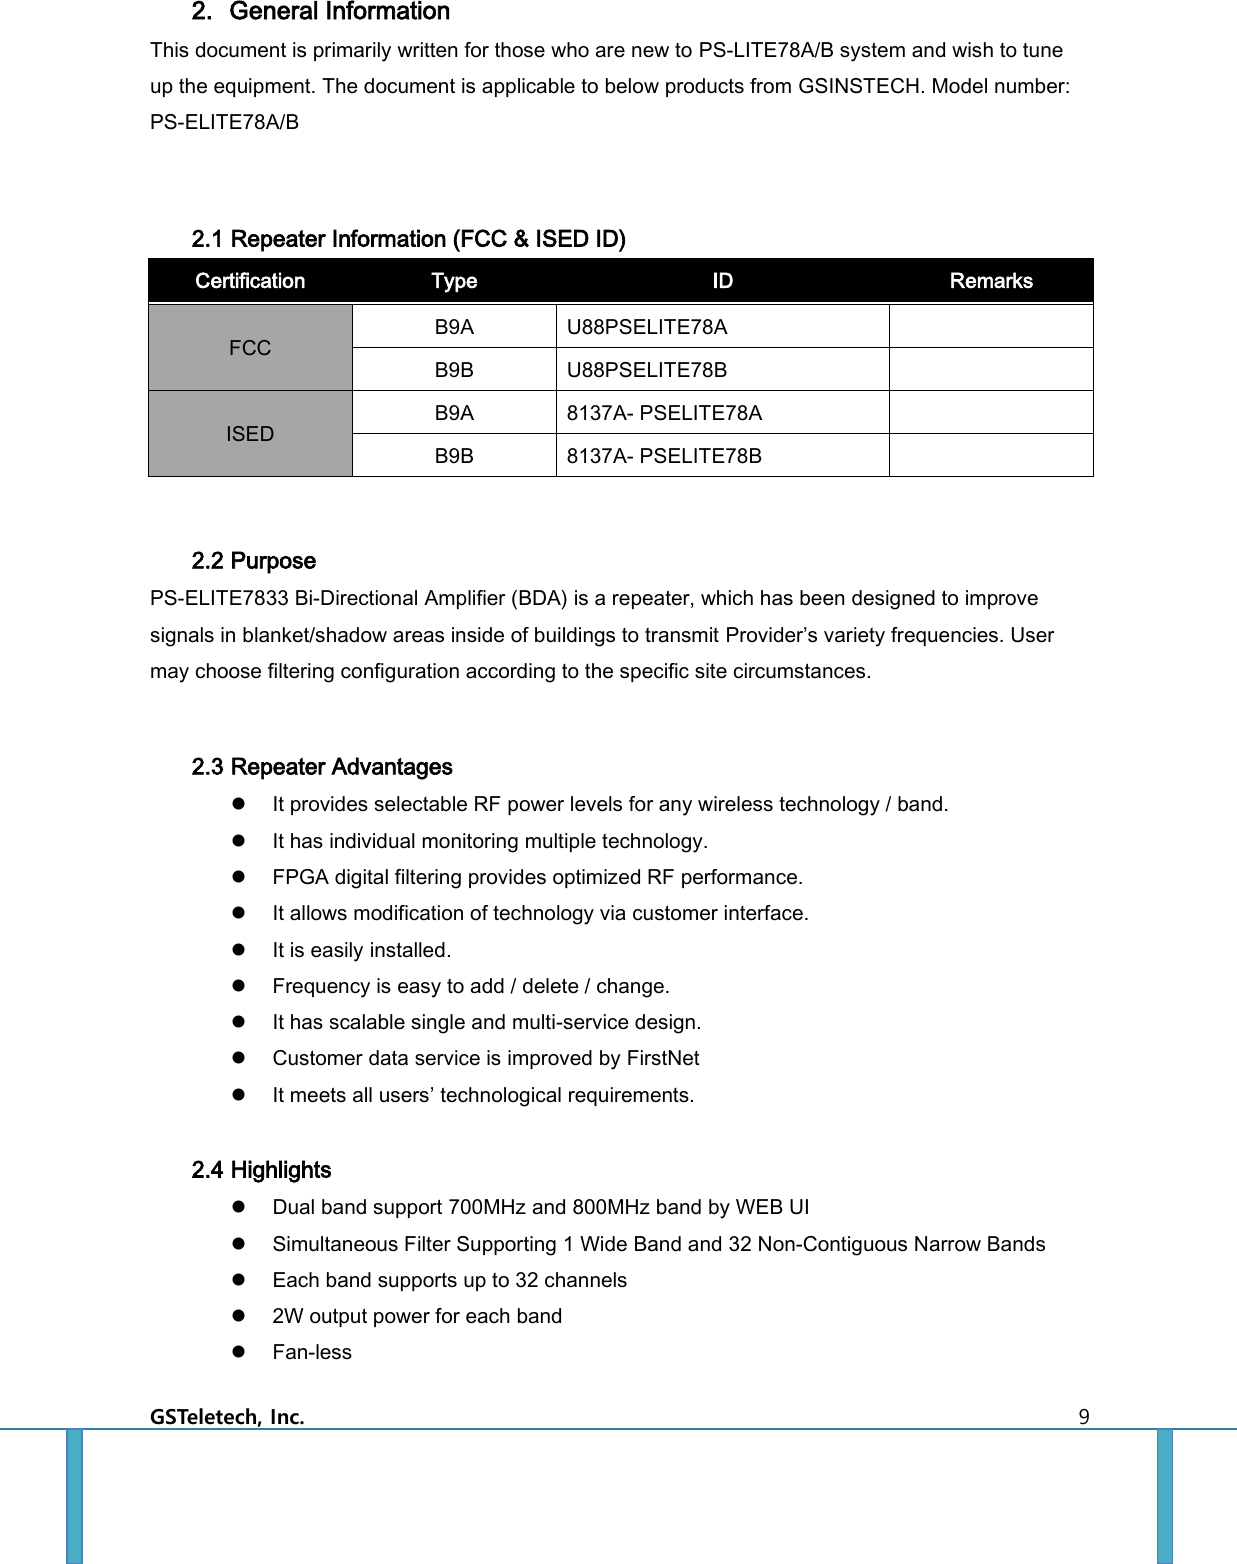  GSTeletech, Inc.    9 2. General Information This document is primarily written for those who are new to PS-LITE78A/B system and wish to tune up the equipment. The document is applicable to below products from GSINSTECH. Model number: PS-ELITE78A/B  2.1 Repeater Information (FCC &amp; ISED ID) Certification Type ID Remarks FCC B9A U88PSELITE78A    B9B U88PSELITE78B    ISED B9A 8137A- PSELITE78A    B9B 8137A- PSELITE78B     2.2 Purpose PS-ELITE7833 Bi-Directional Amplifier (BDA) is a repeater, which has been designed to improve signals in blanket/shadow areas inside of buildings to transmit Provider’s variety frequencies. User may choose filtering configuration according to the specific site circumstances.    2.3 Repeater Advantages  It provides selectable RF power levels for any wireless technology / band.  It has individual monitoring multiple technology.  FPGA digital filtering provides optimized RF performance.  It allows modification of technology via customer interface.  It is easily installed.  Frequency is easy to add / delete / change.  It has scalable single and multi-service design.  Customer data service is improved by FirstNet  It meets all users’ technological requirements.  2.4 Highlights  Dual band support 700MHz and 800MHz band by WEB UI  Simultaneous Filter Supporting 1 Wide Band and 32 Non-Contiguous Narrow Bands  Each band supports up to 32 channels  2W output power for each band  Fan-less 